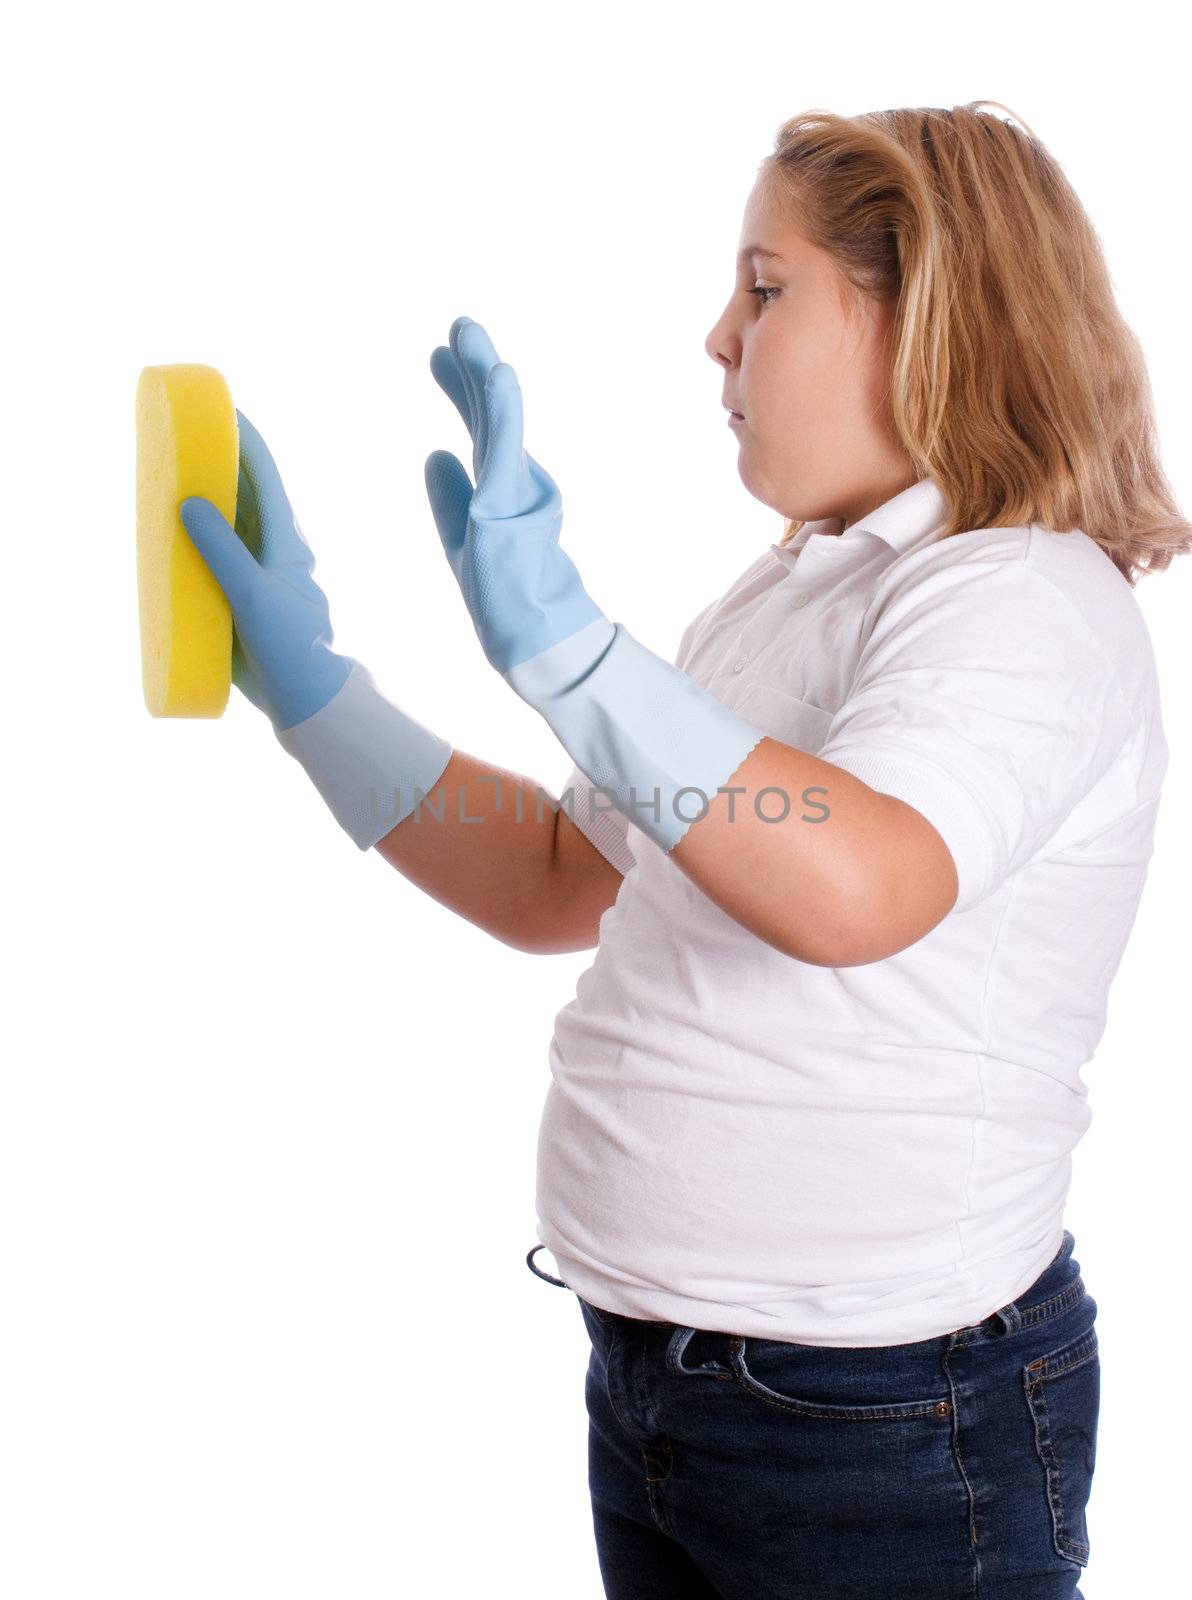 A young girl cleaning something with a yellow sponge, isolated against a white background